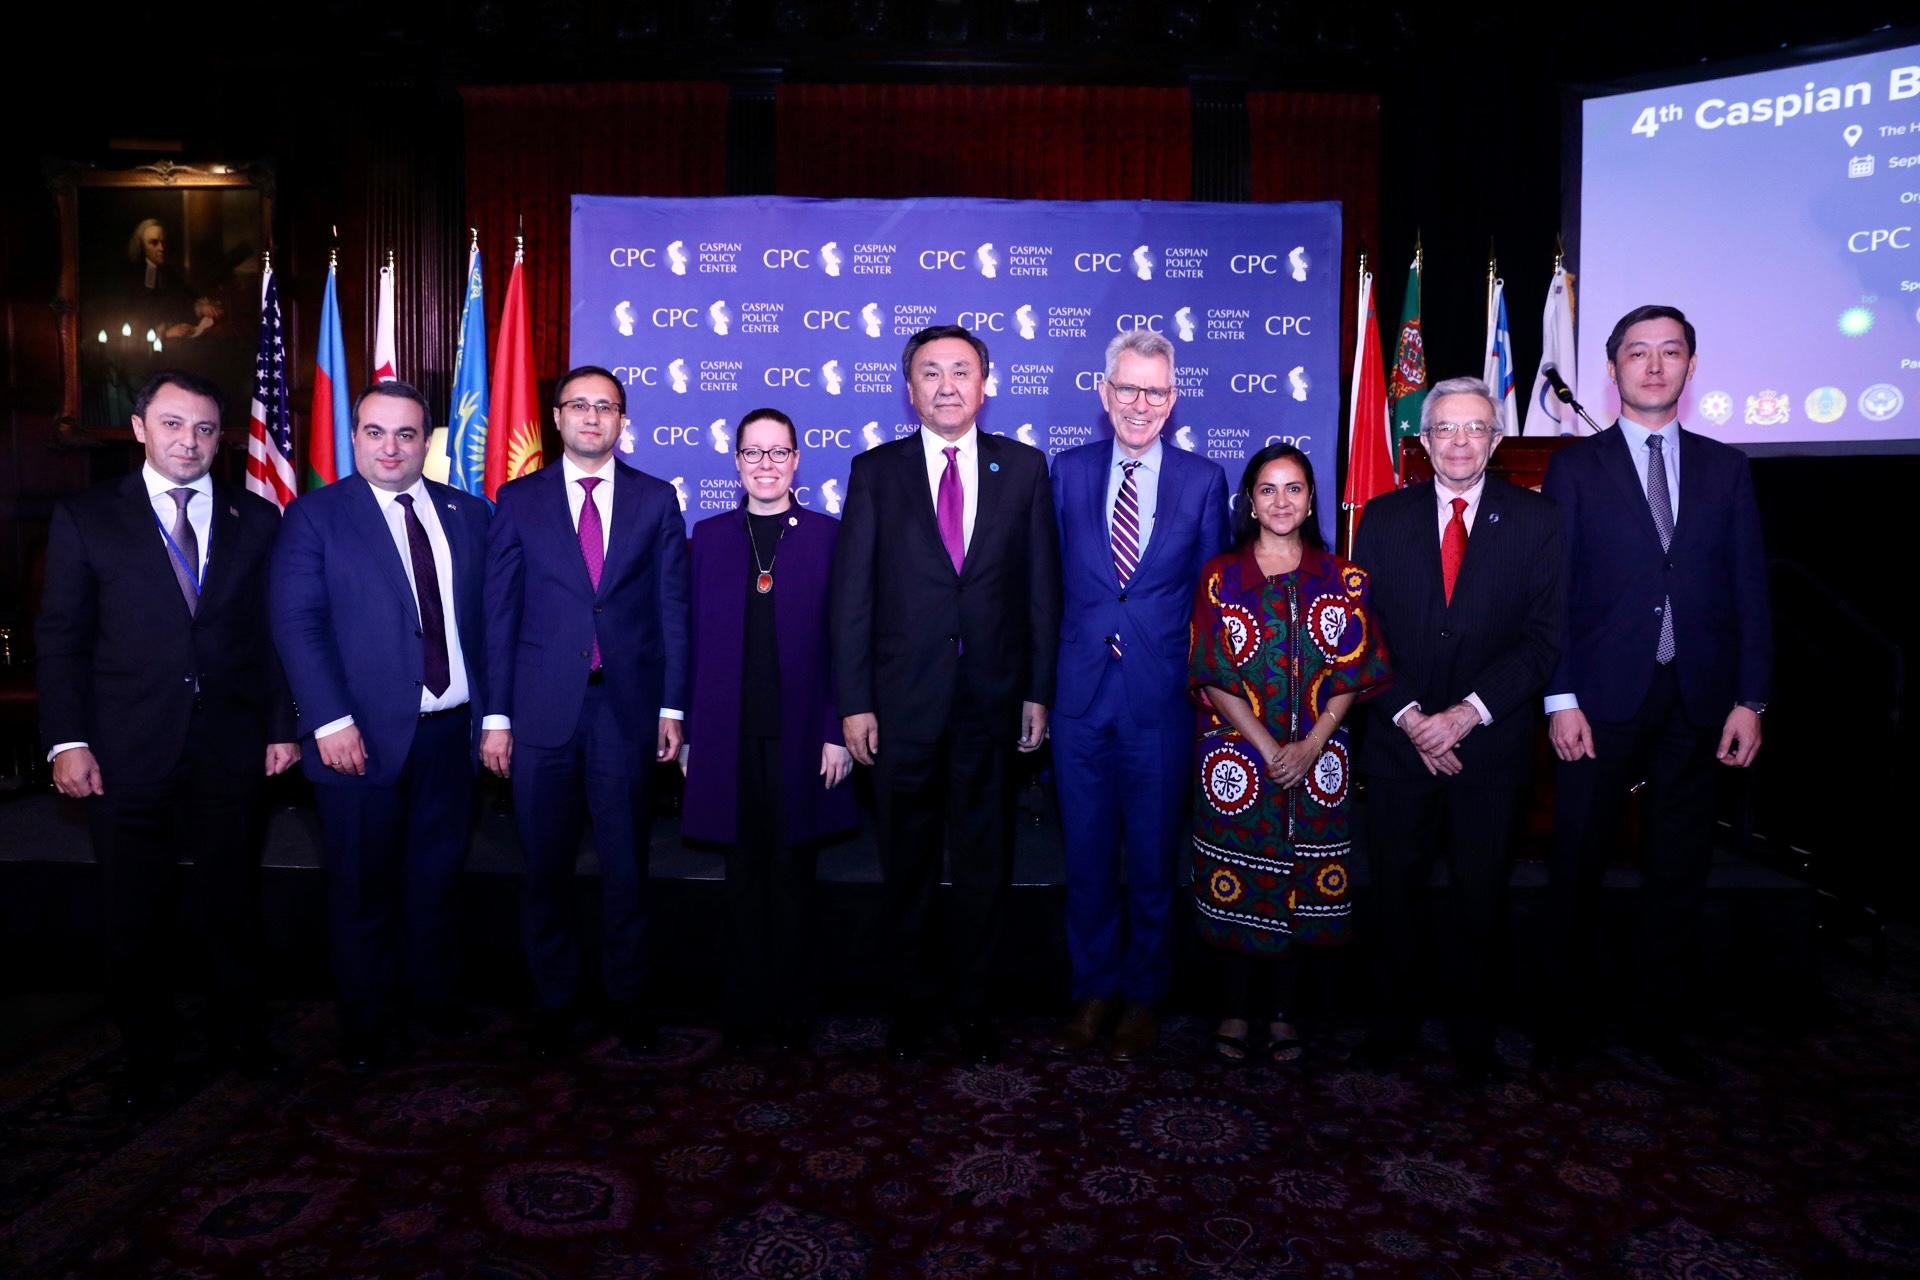 Caspian Policy Center Hosts 4th Annual Caspian Business Forum Following President Biden’s Meeting with the C5+1 Leaders in New York